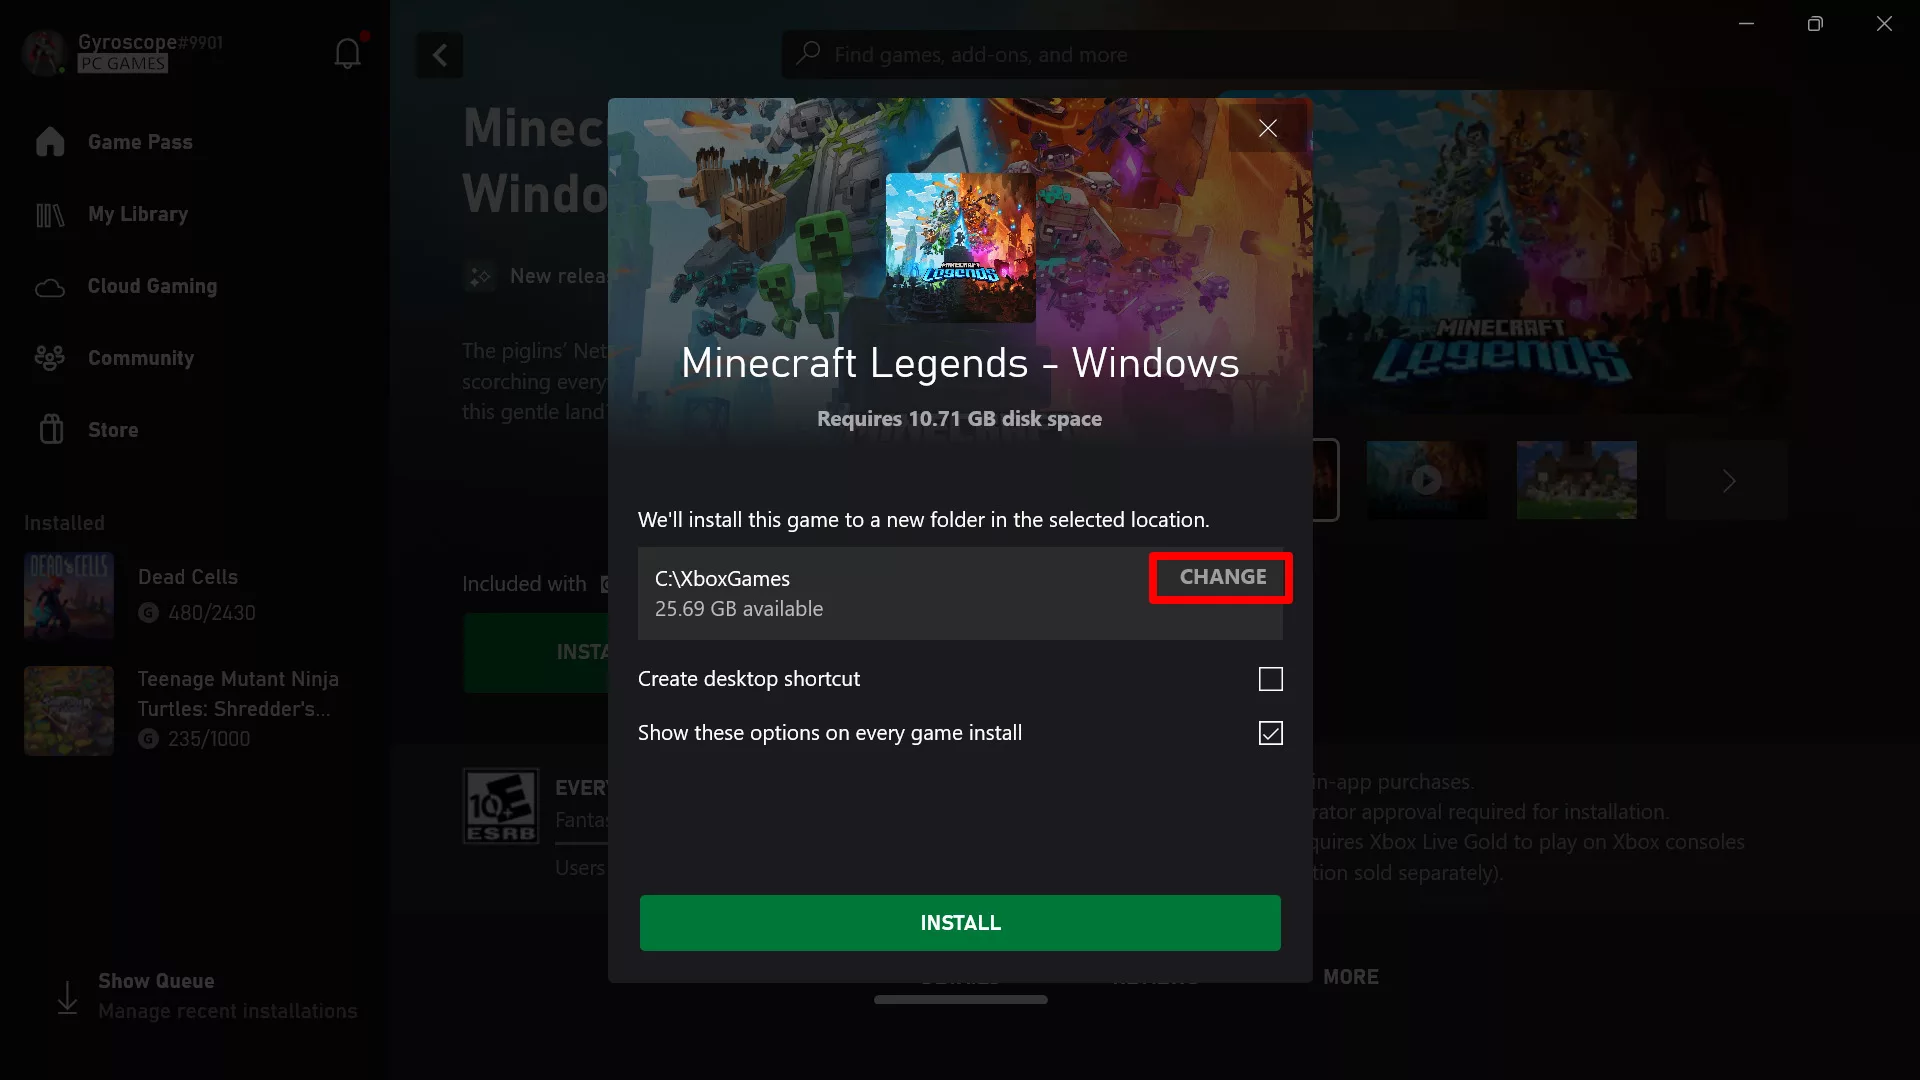 A screenshot of the Xbox app's installation wizard, showing the ability to choose the install location.